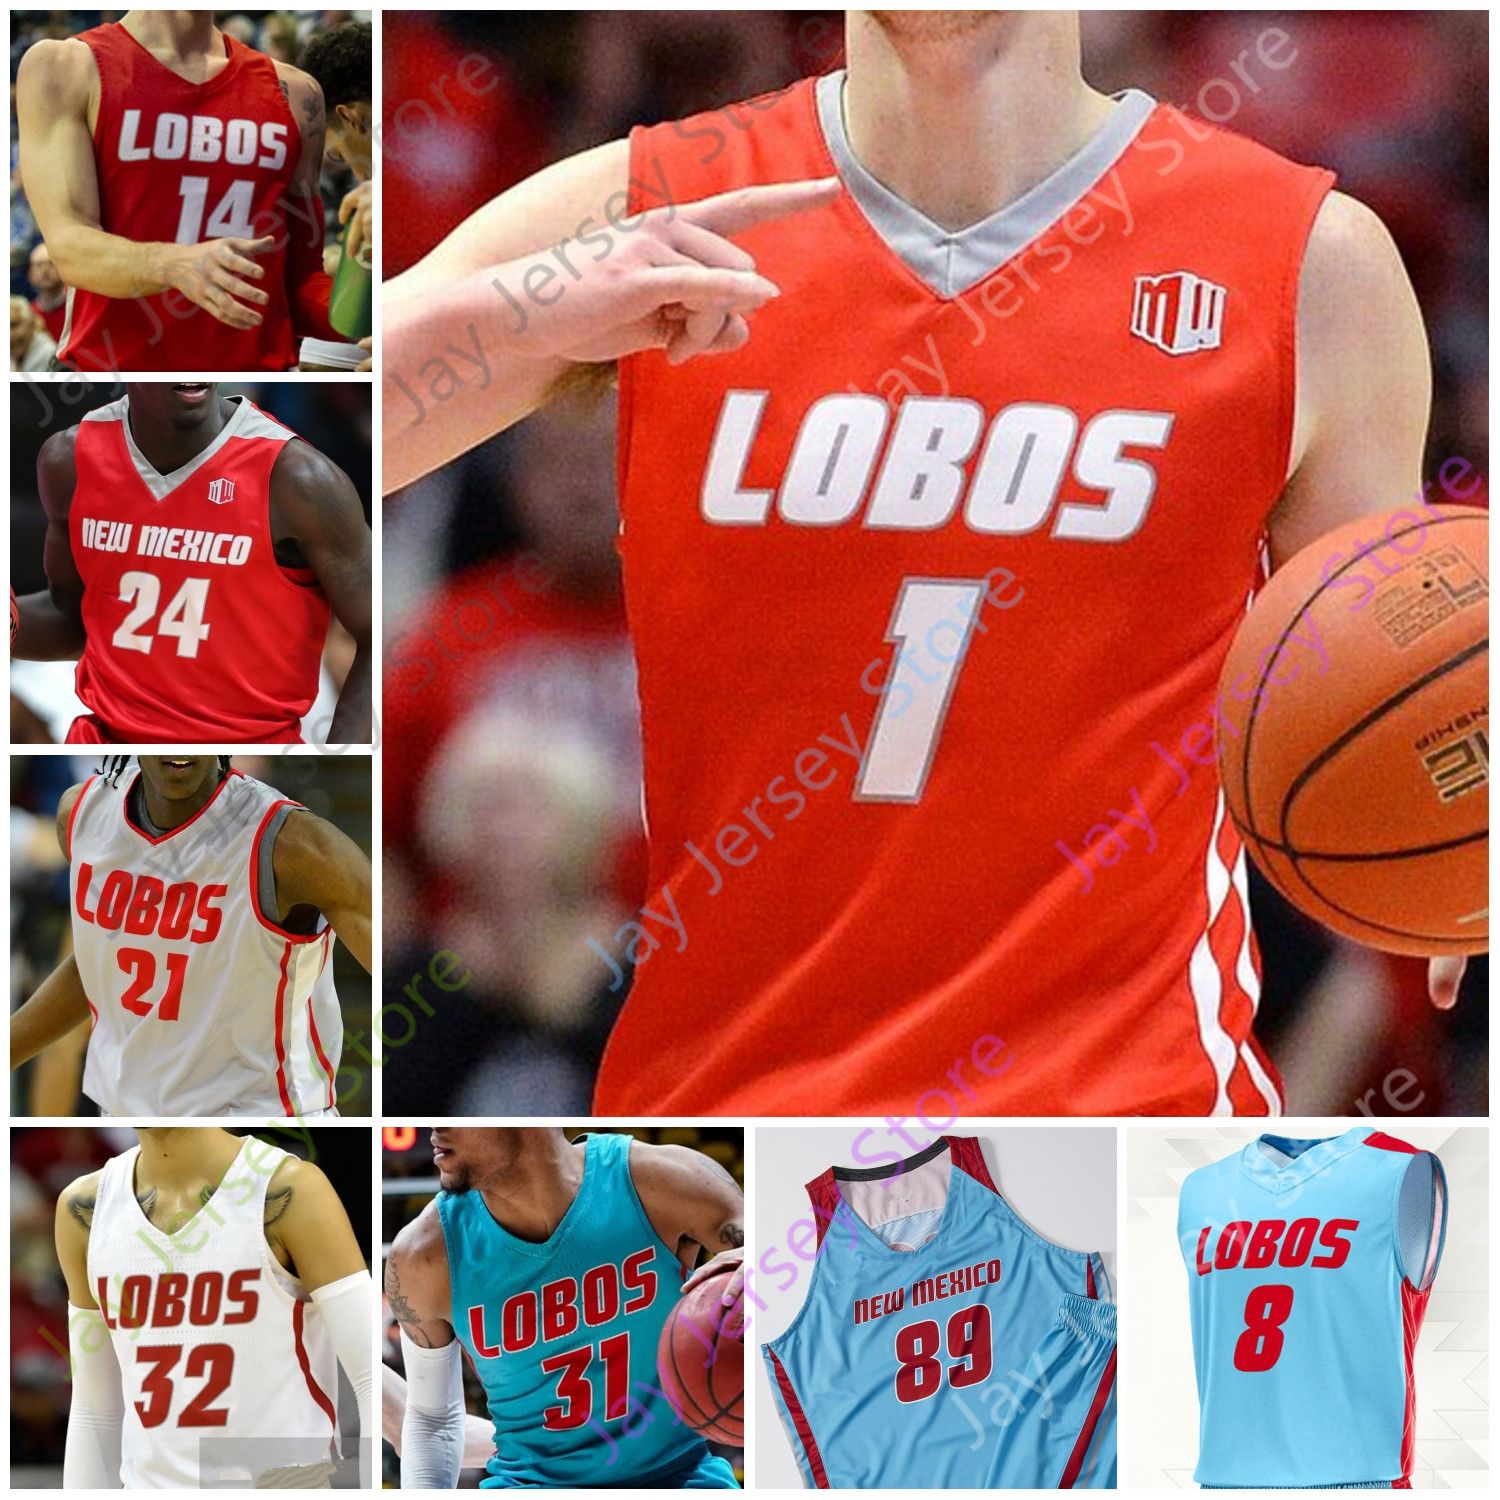 new mexico basketball jersey